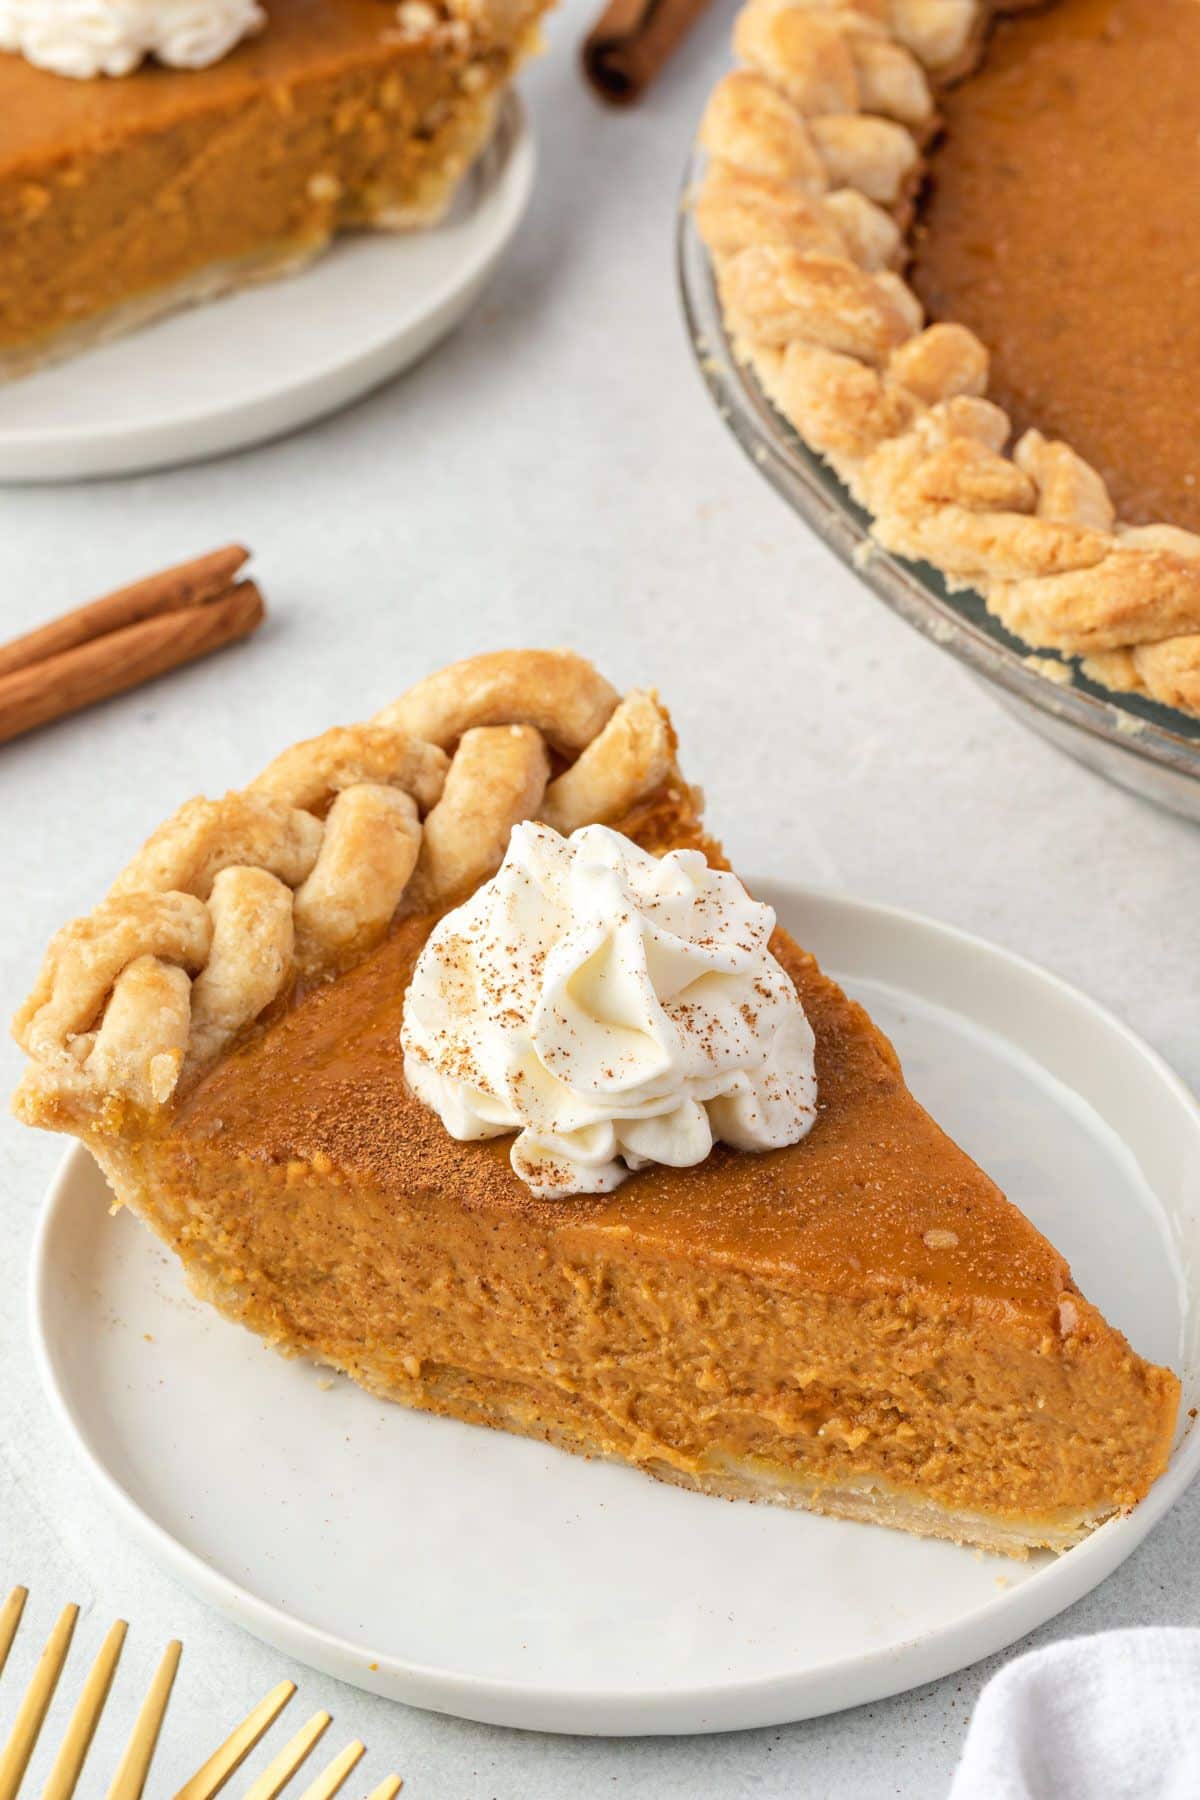 Slice of pumpkin pie on a plate, with the pie in 1 corner and another slice in the ohter.